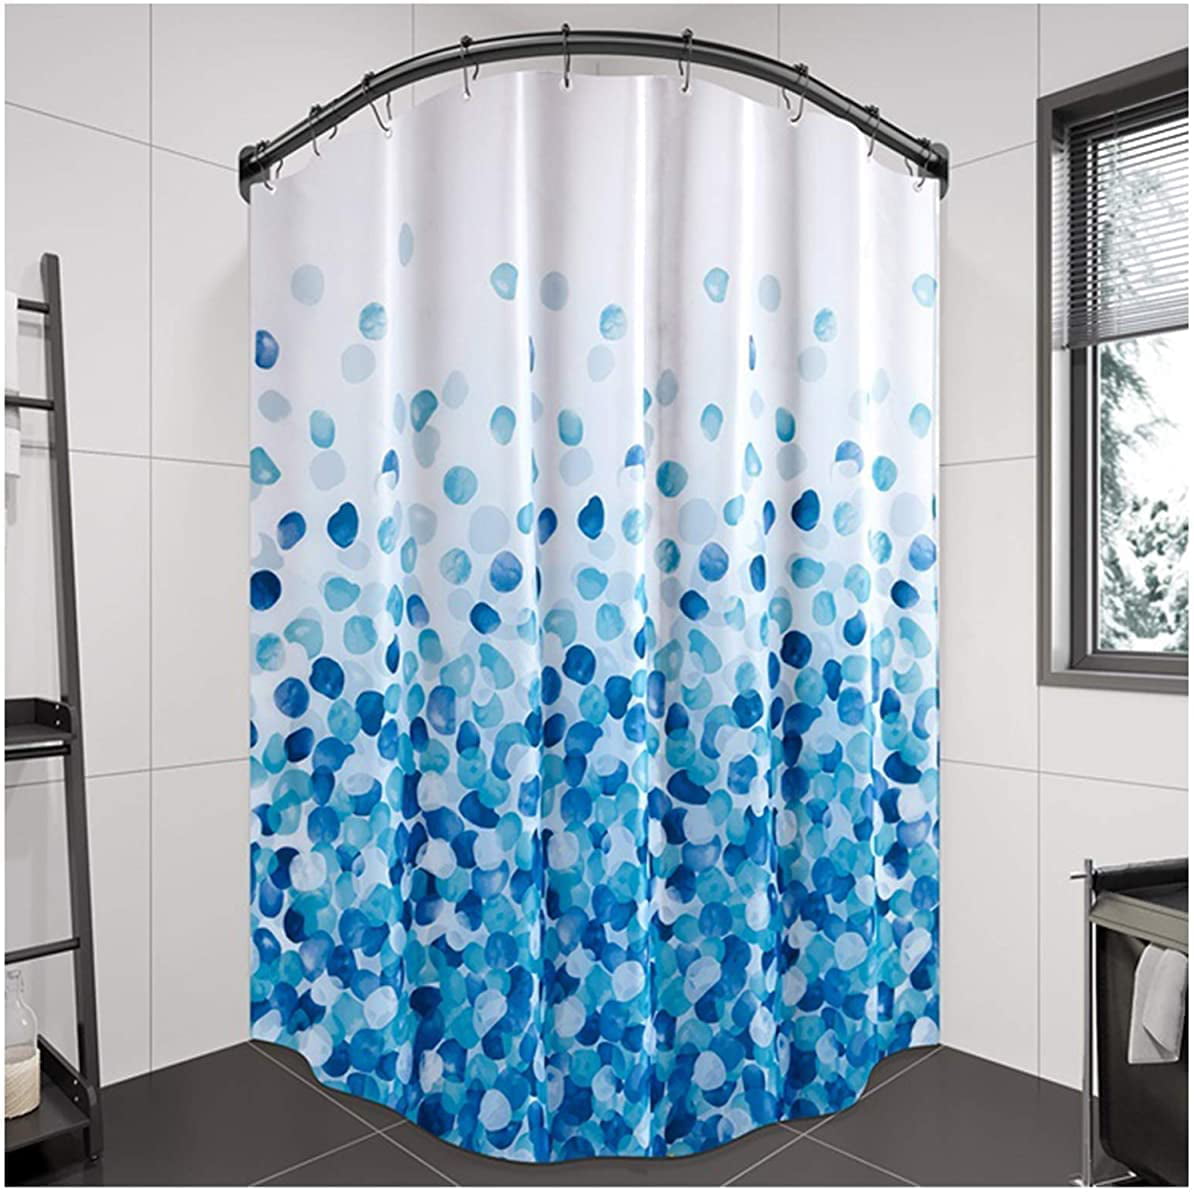 Waterproof Button Hole Shower Drapes For Your Bathtub Bathroom Decorations Multiple Sized Desk With Heart Shape Printed Showers Curtain